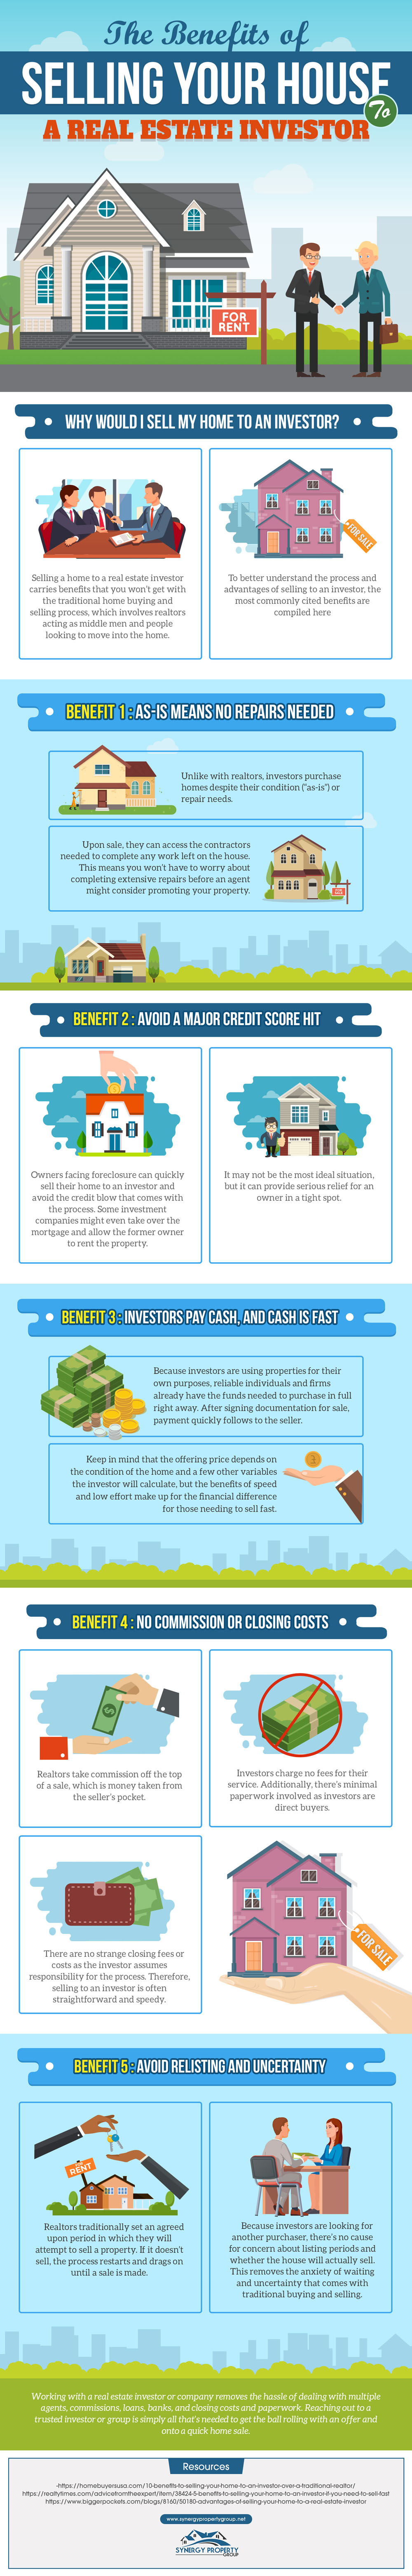 The Benefits of Selling Your House to a Real Estate Investor